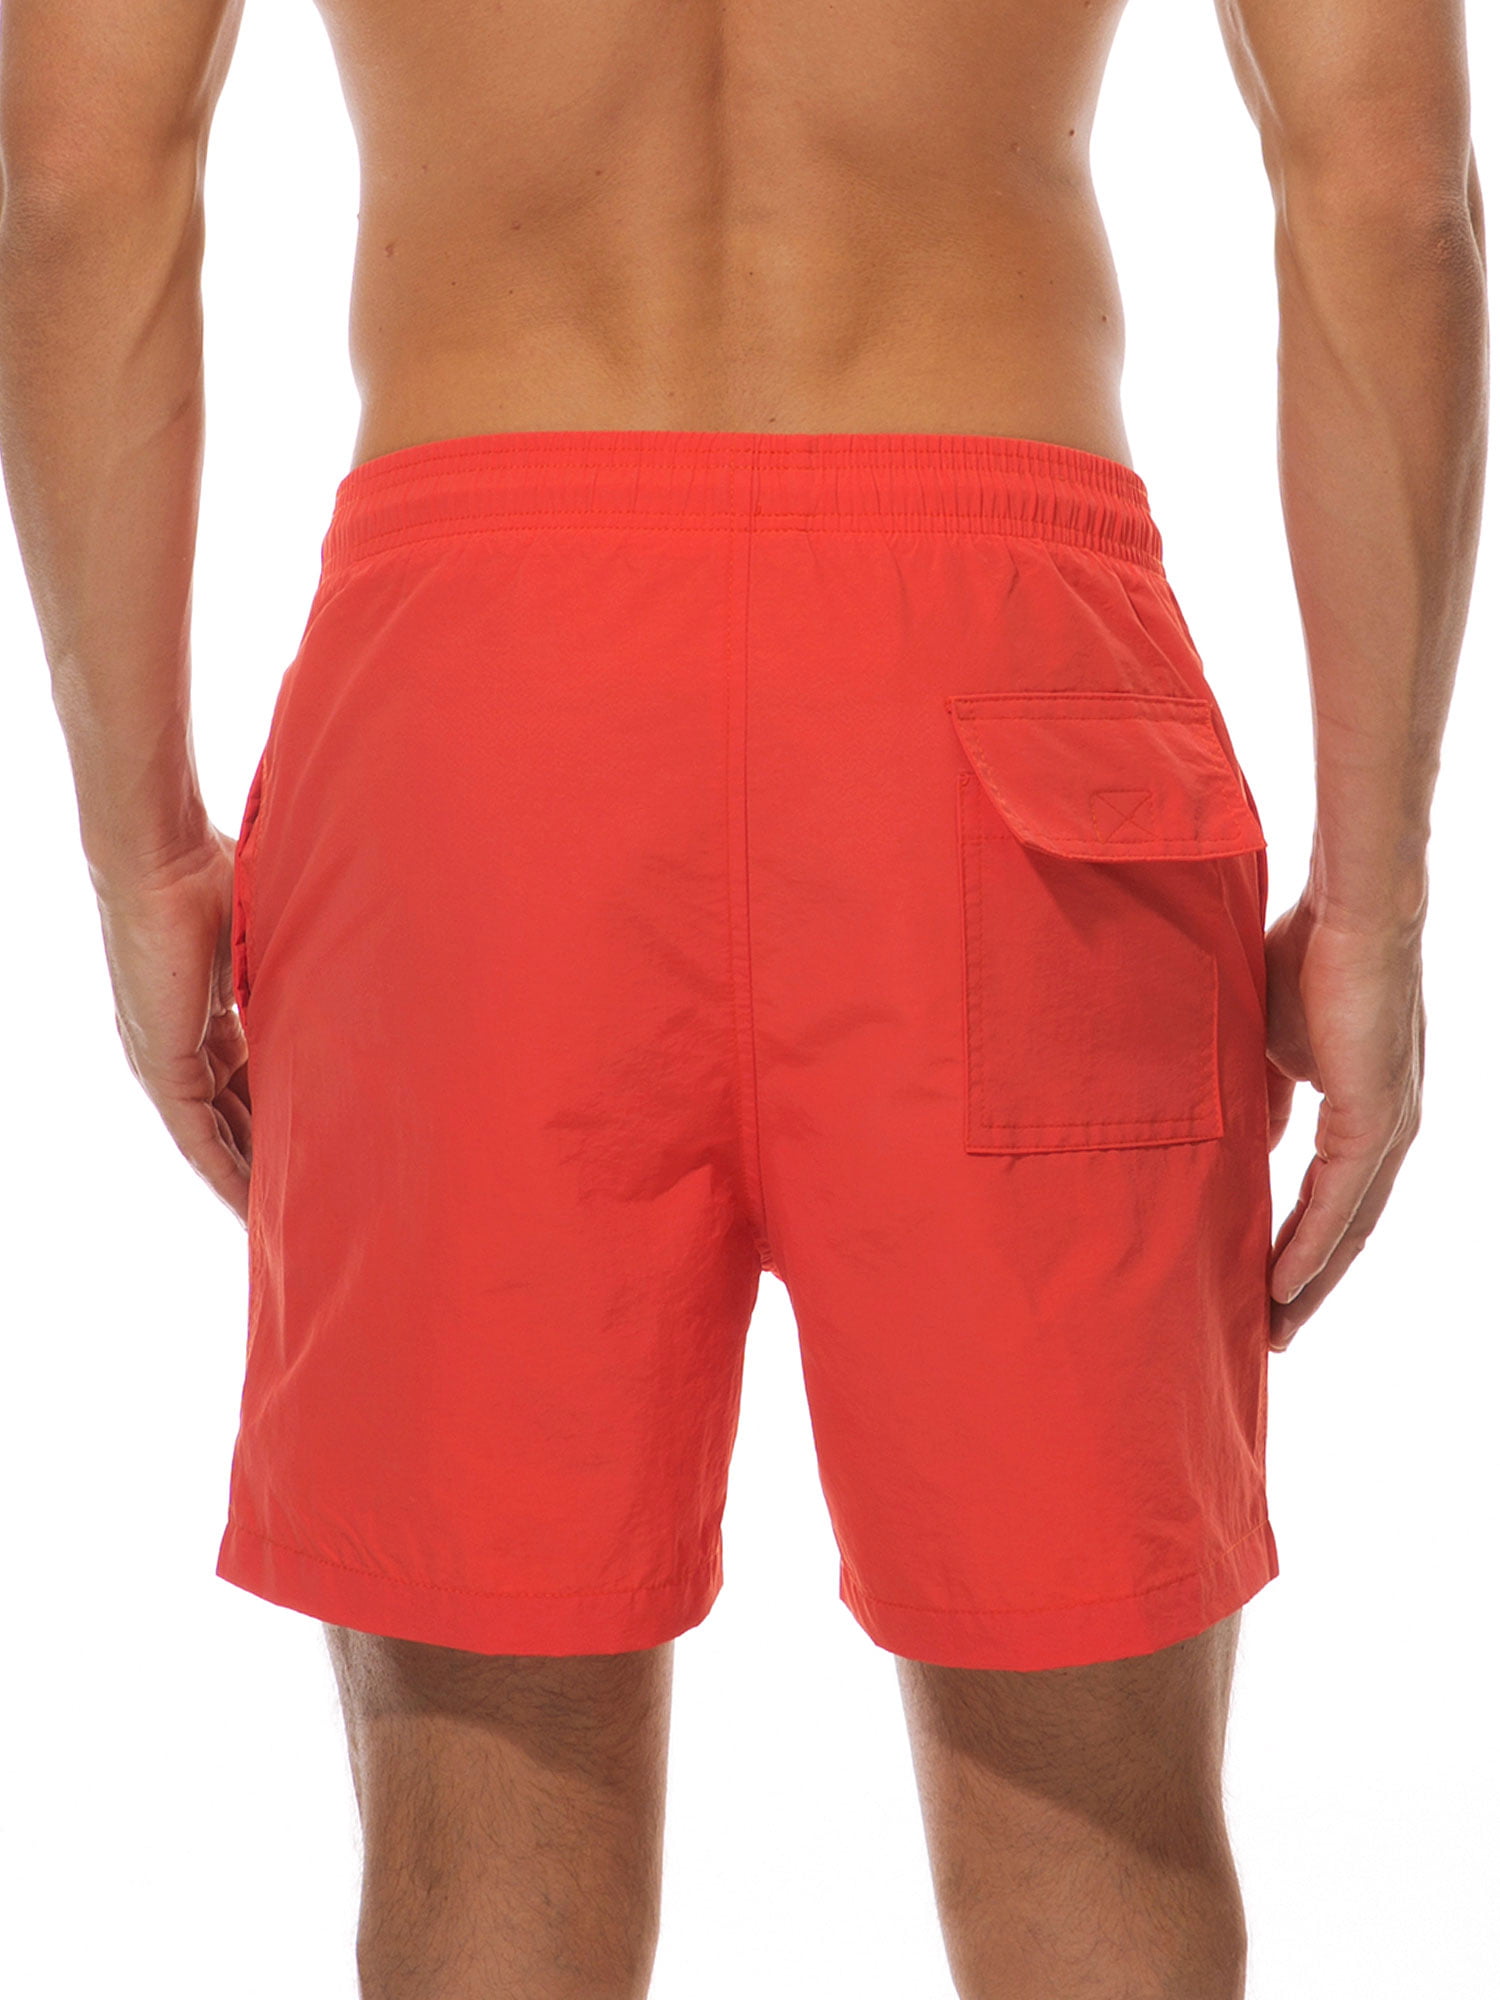 red Details about   Arena Men Swim shorts Red-Turquoise M 